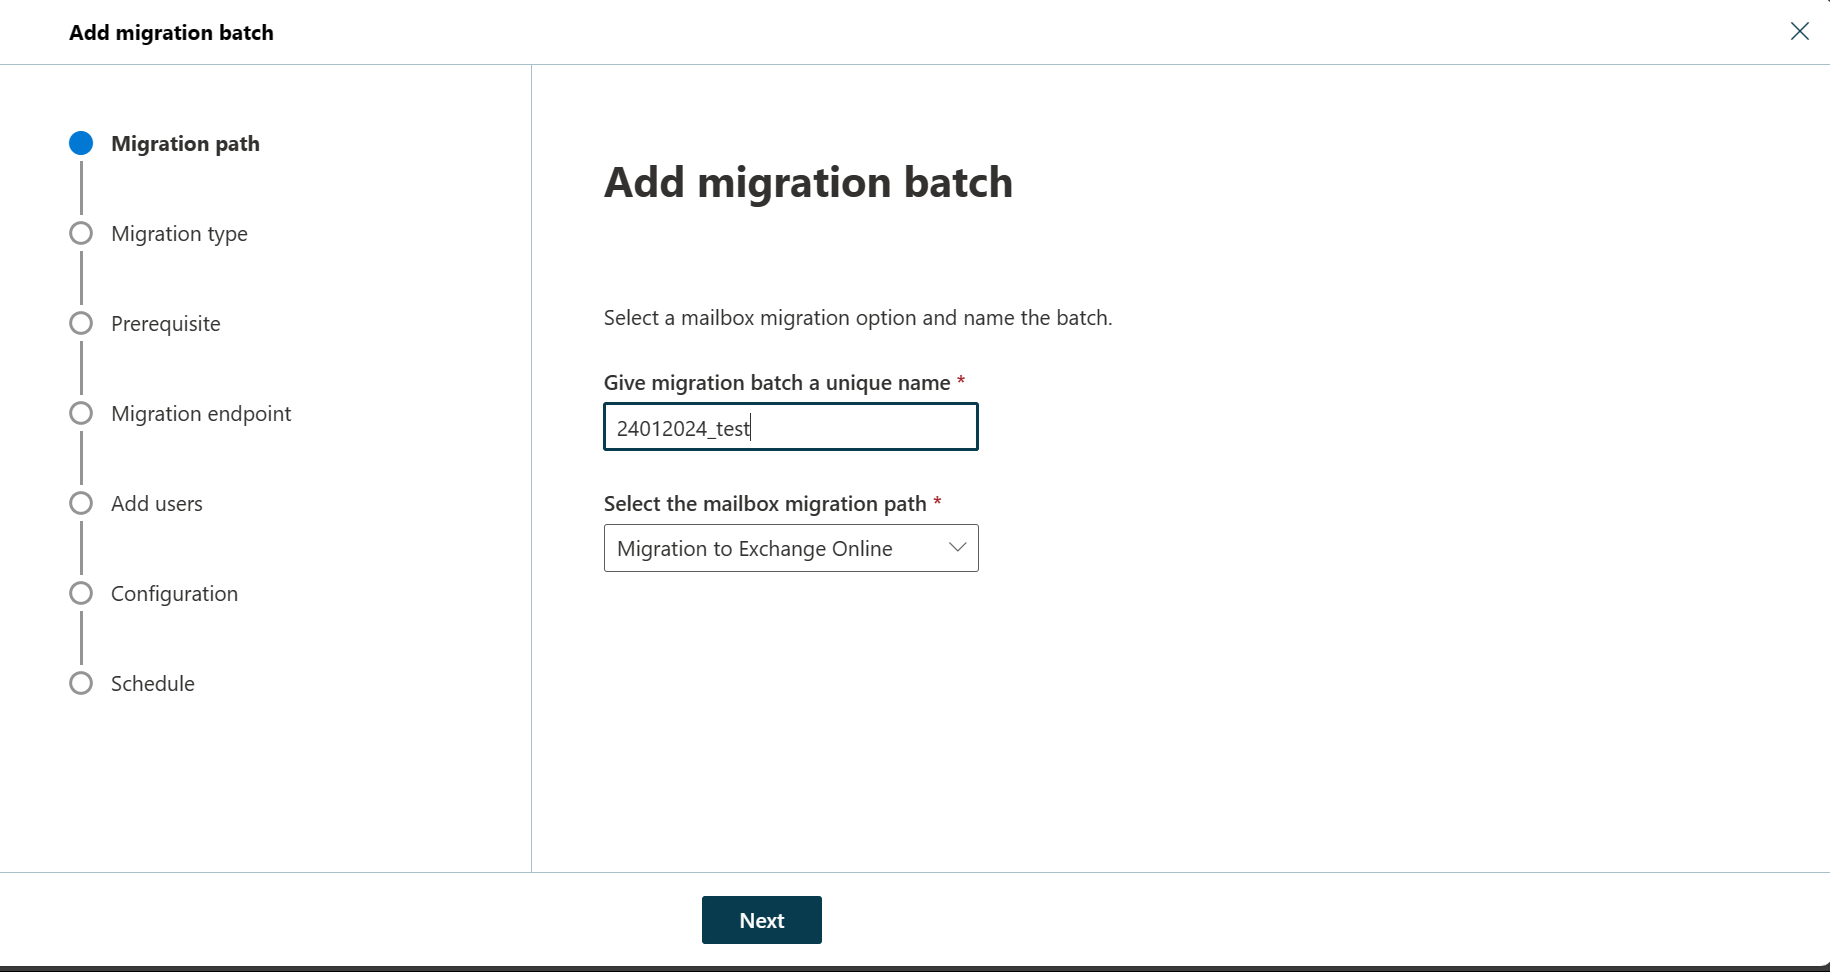 Screenshot of Add migration batch wizard where the user can specify the name for the migration and the migration path.